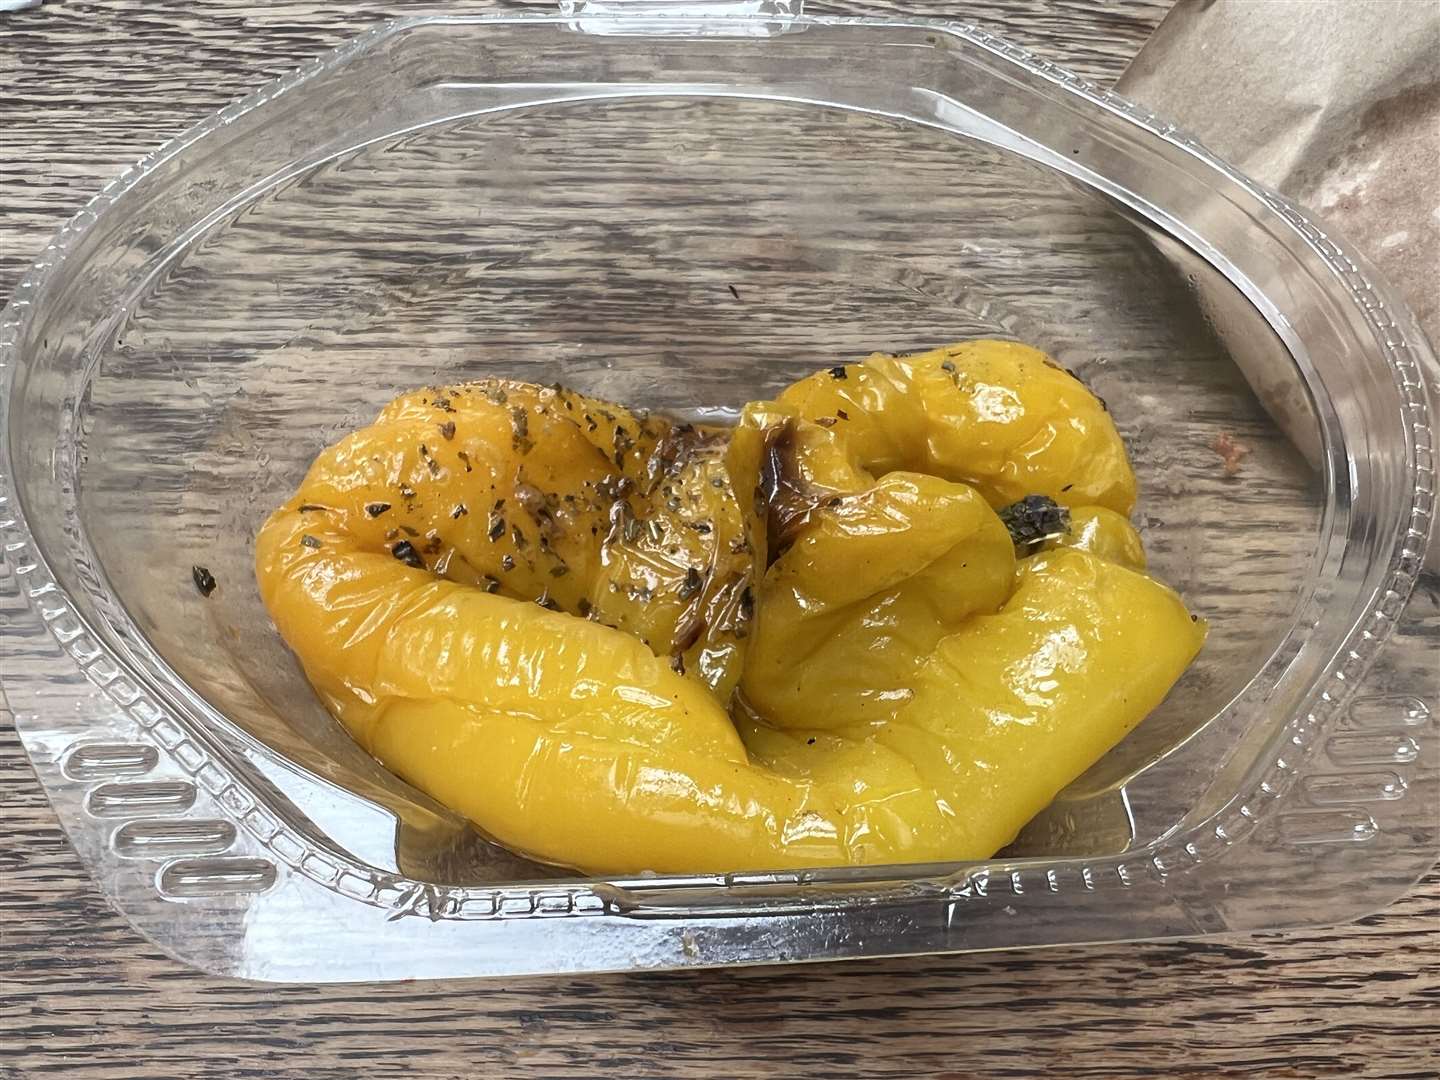 The roasted pepper from The Italian Store in Sittingbourne